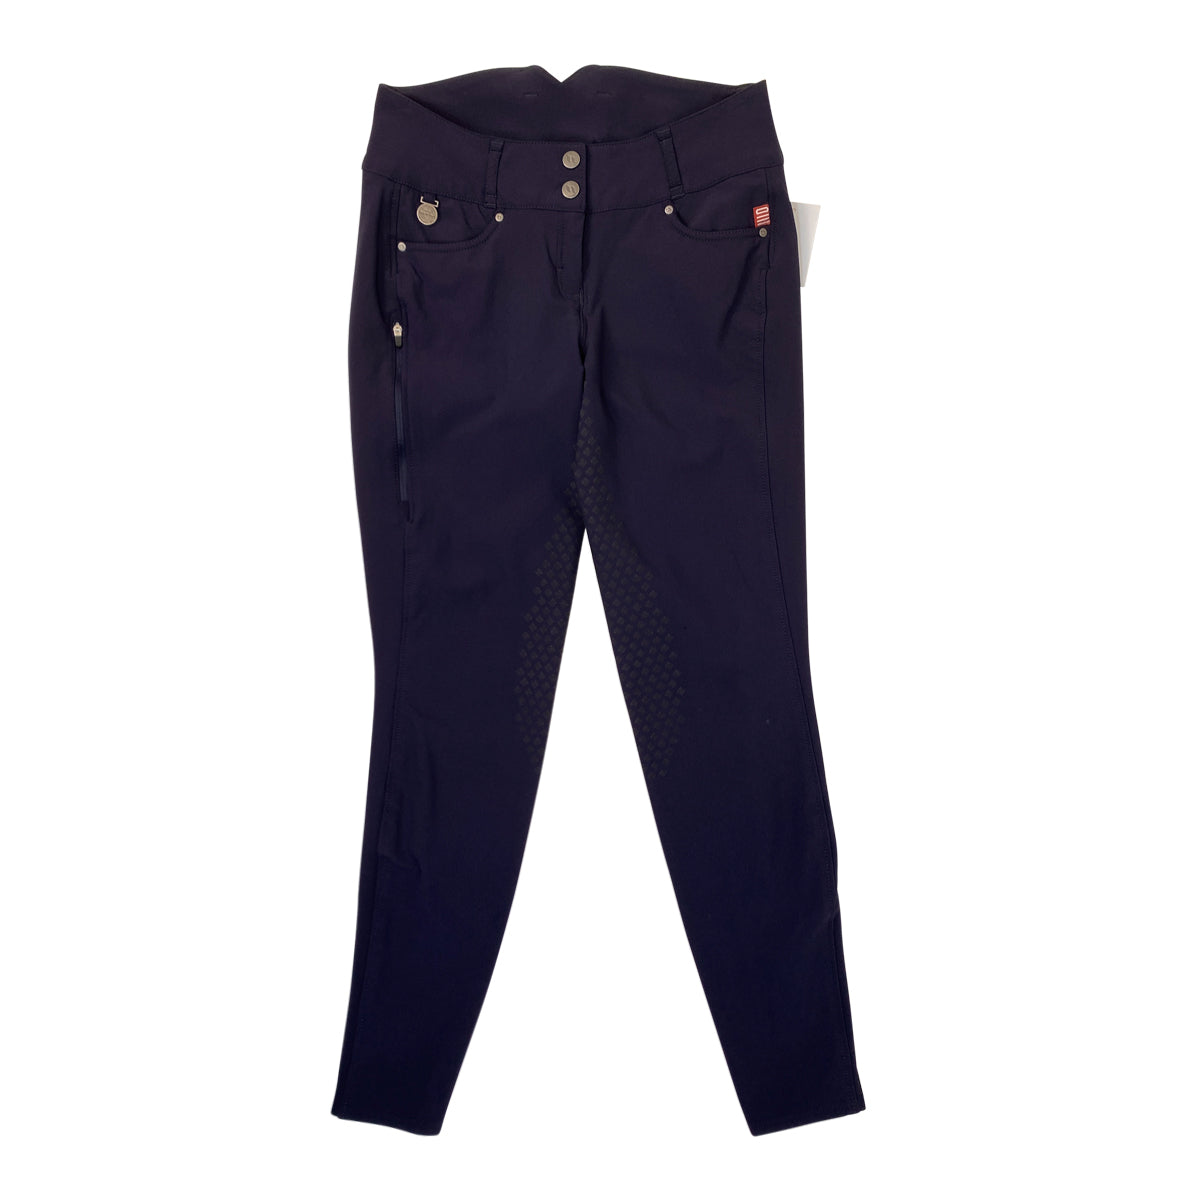 Back on Track Julia Full Seat Breeches in Navy